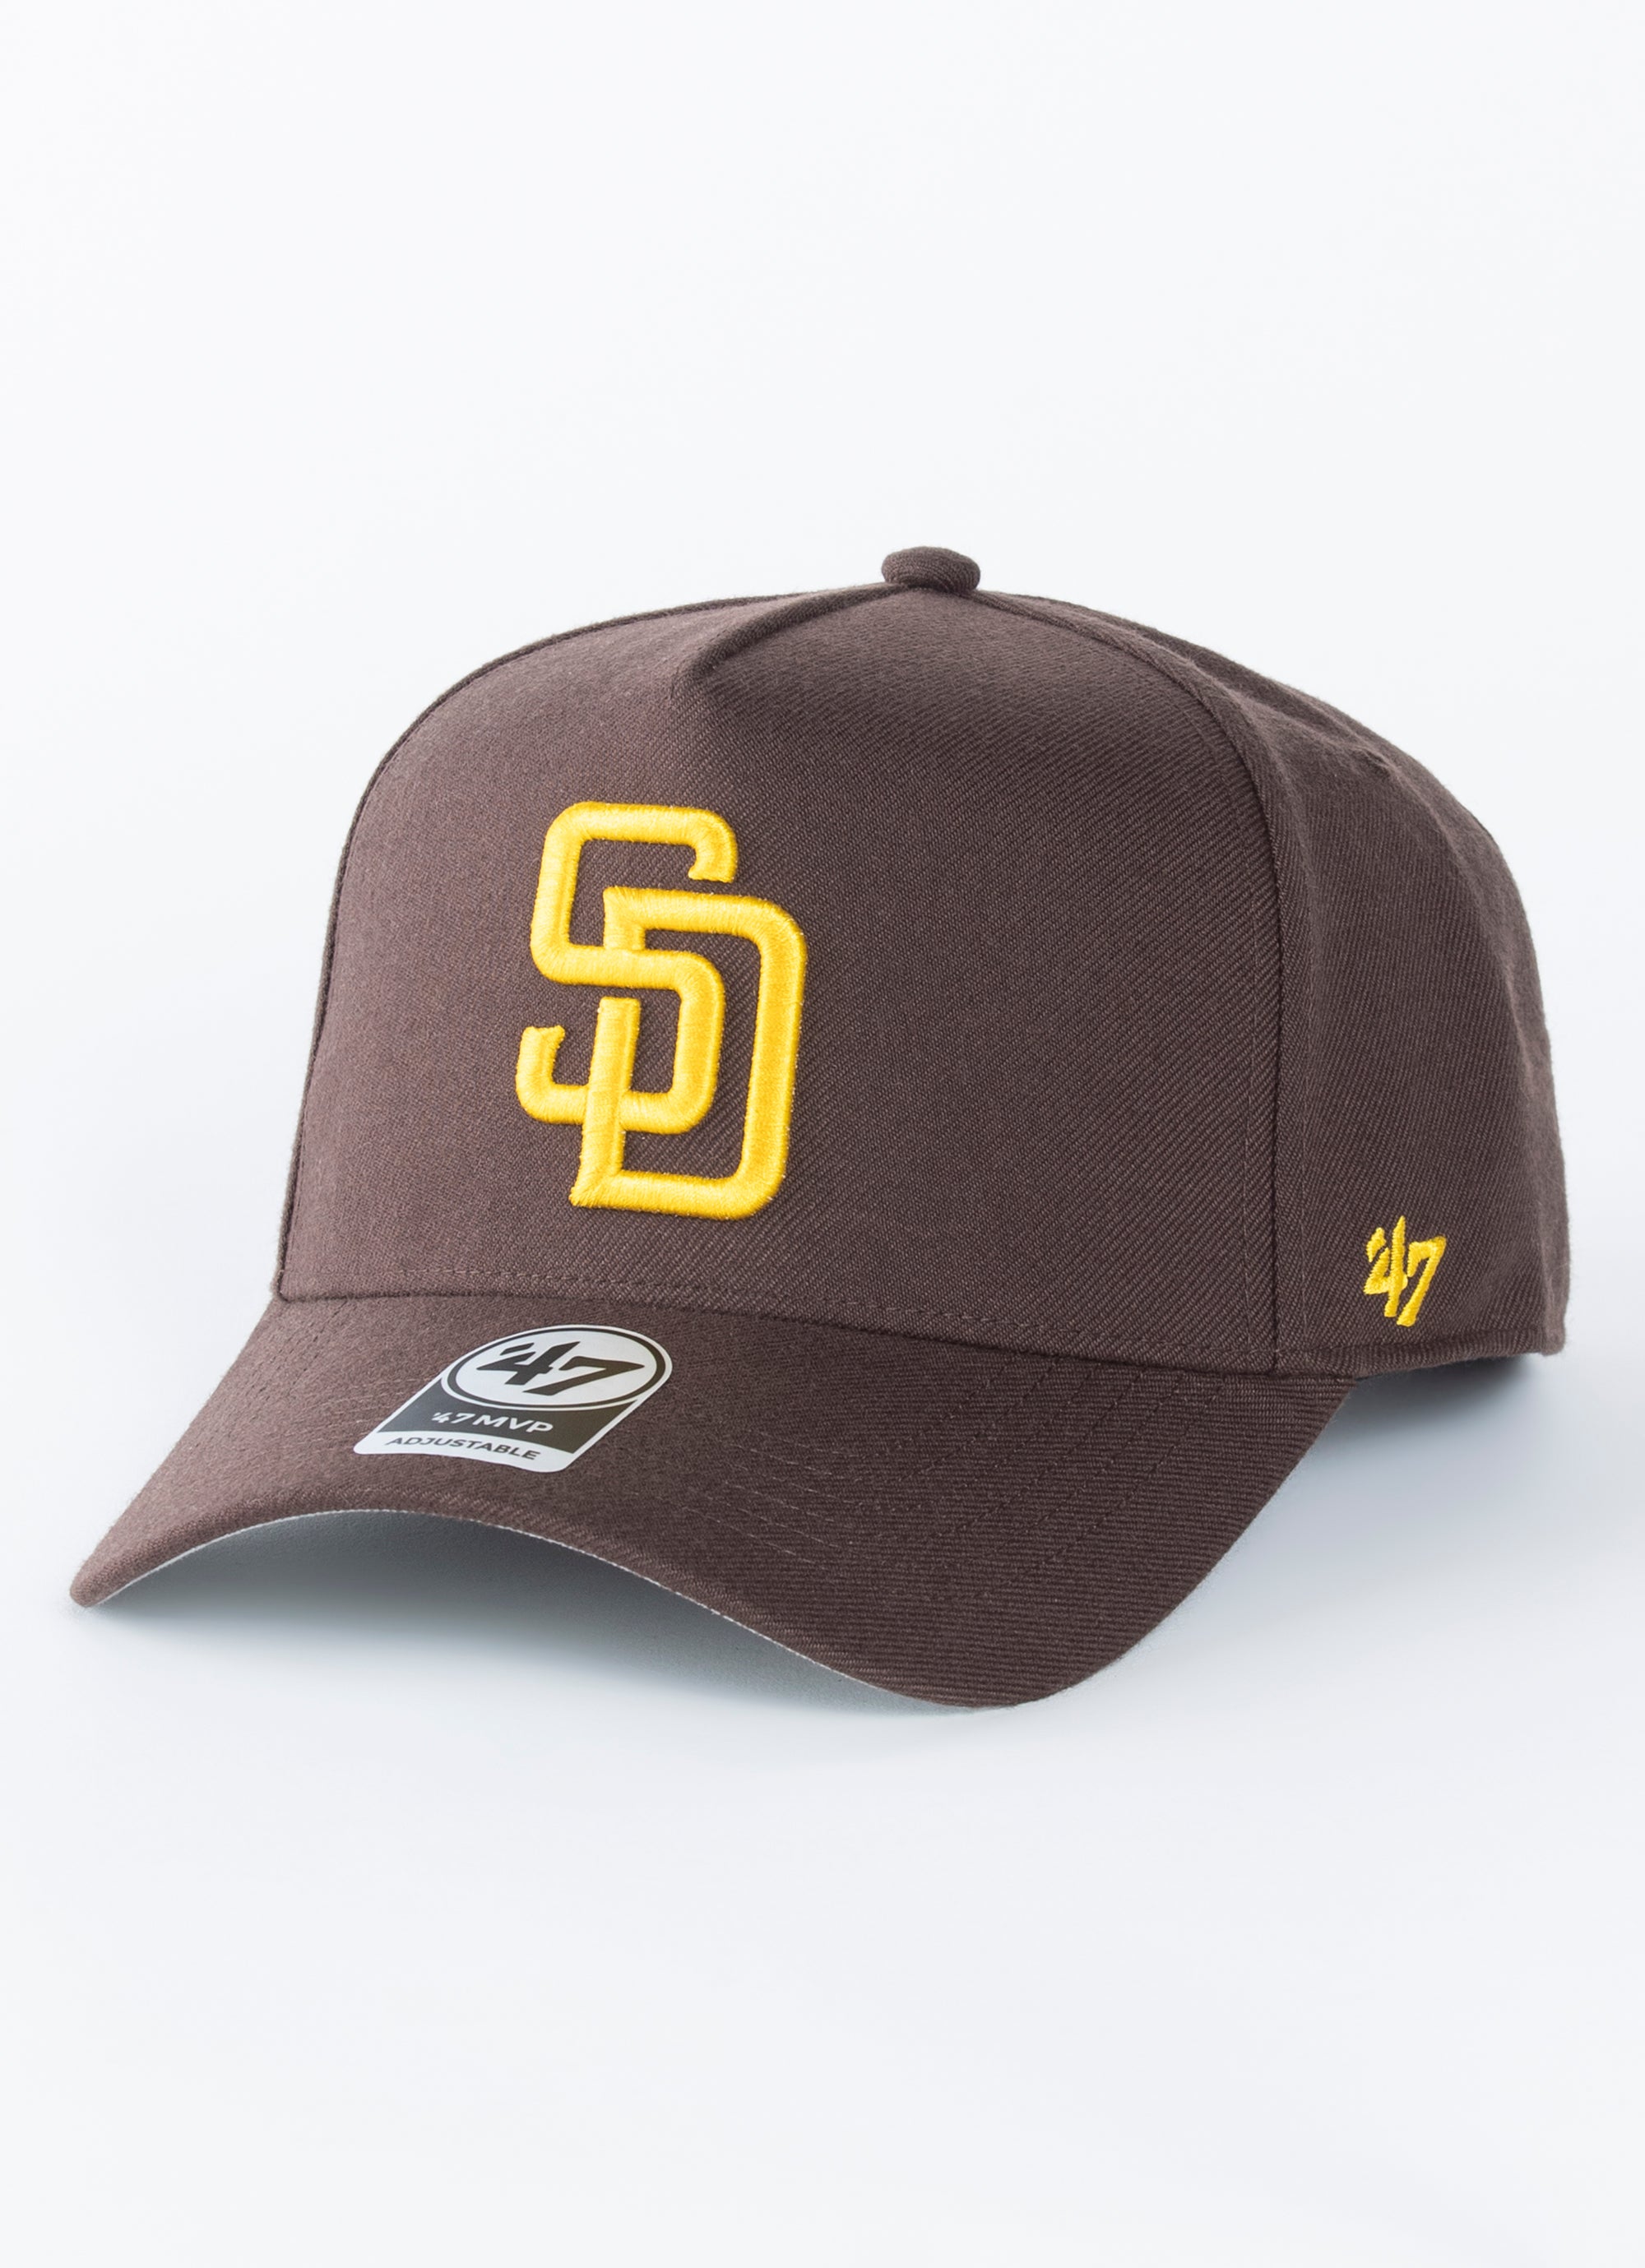 History And Victory The San Diego Padres Get A Win And Set MLB Records In  The Process  NBC 7 San Diego